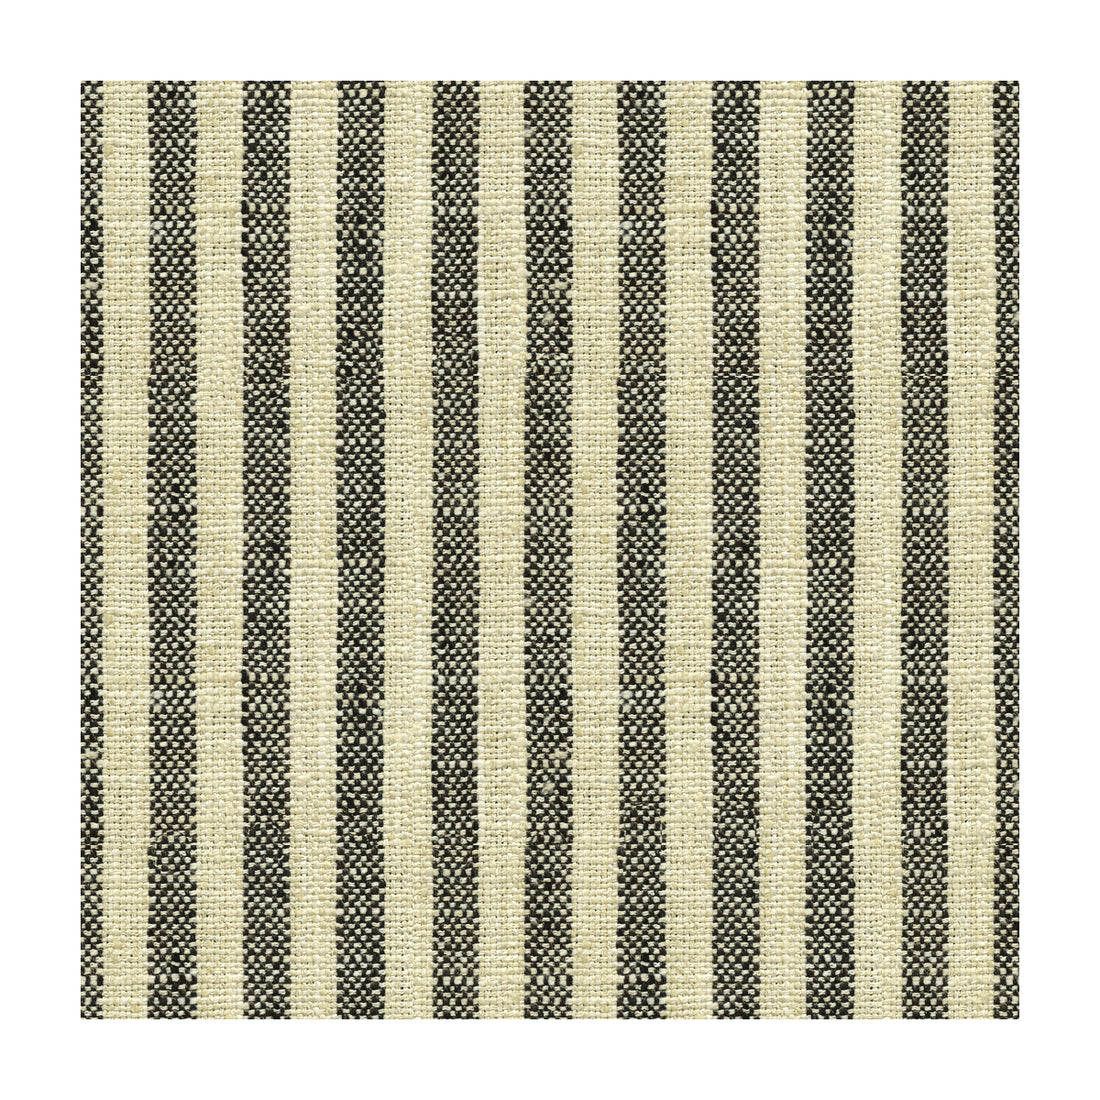 Kravet Basics fabric in 34080-81 color - pattern 34080.81.0 - by Kravet Basics in the Bungalow Chic II collection